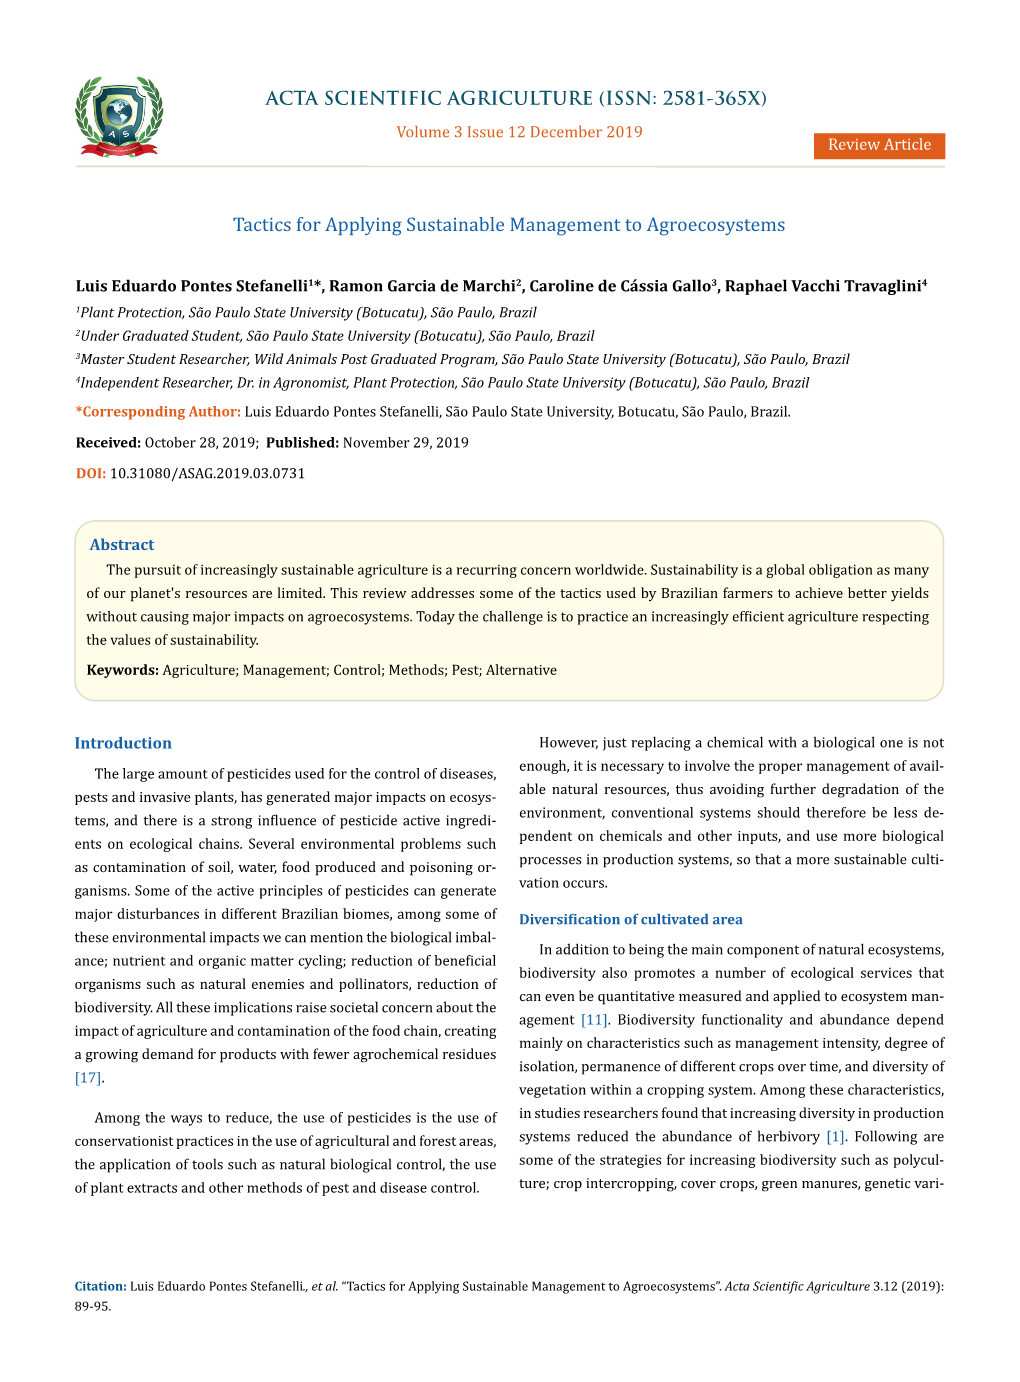 Tactics for Applying Sustainable Management to Agroecosystems